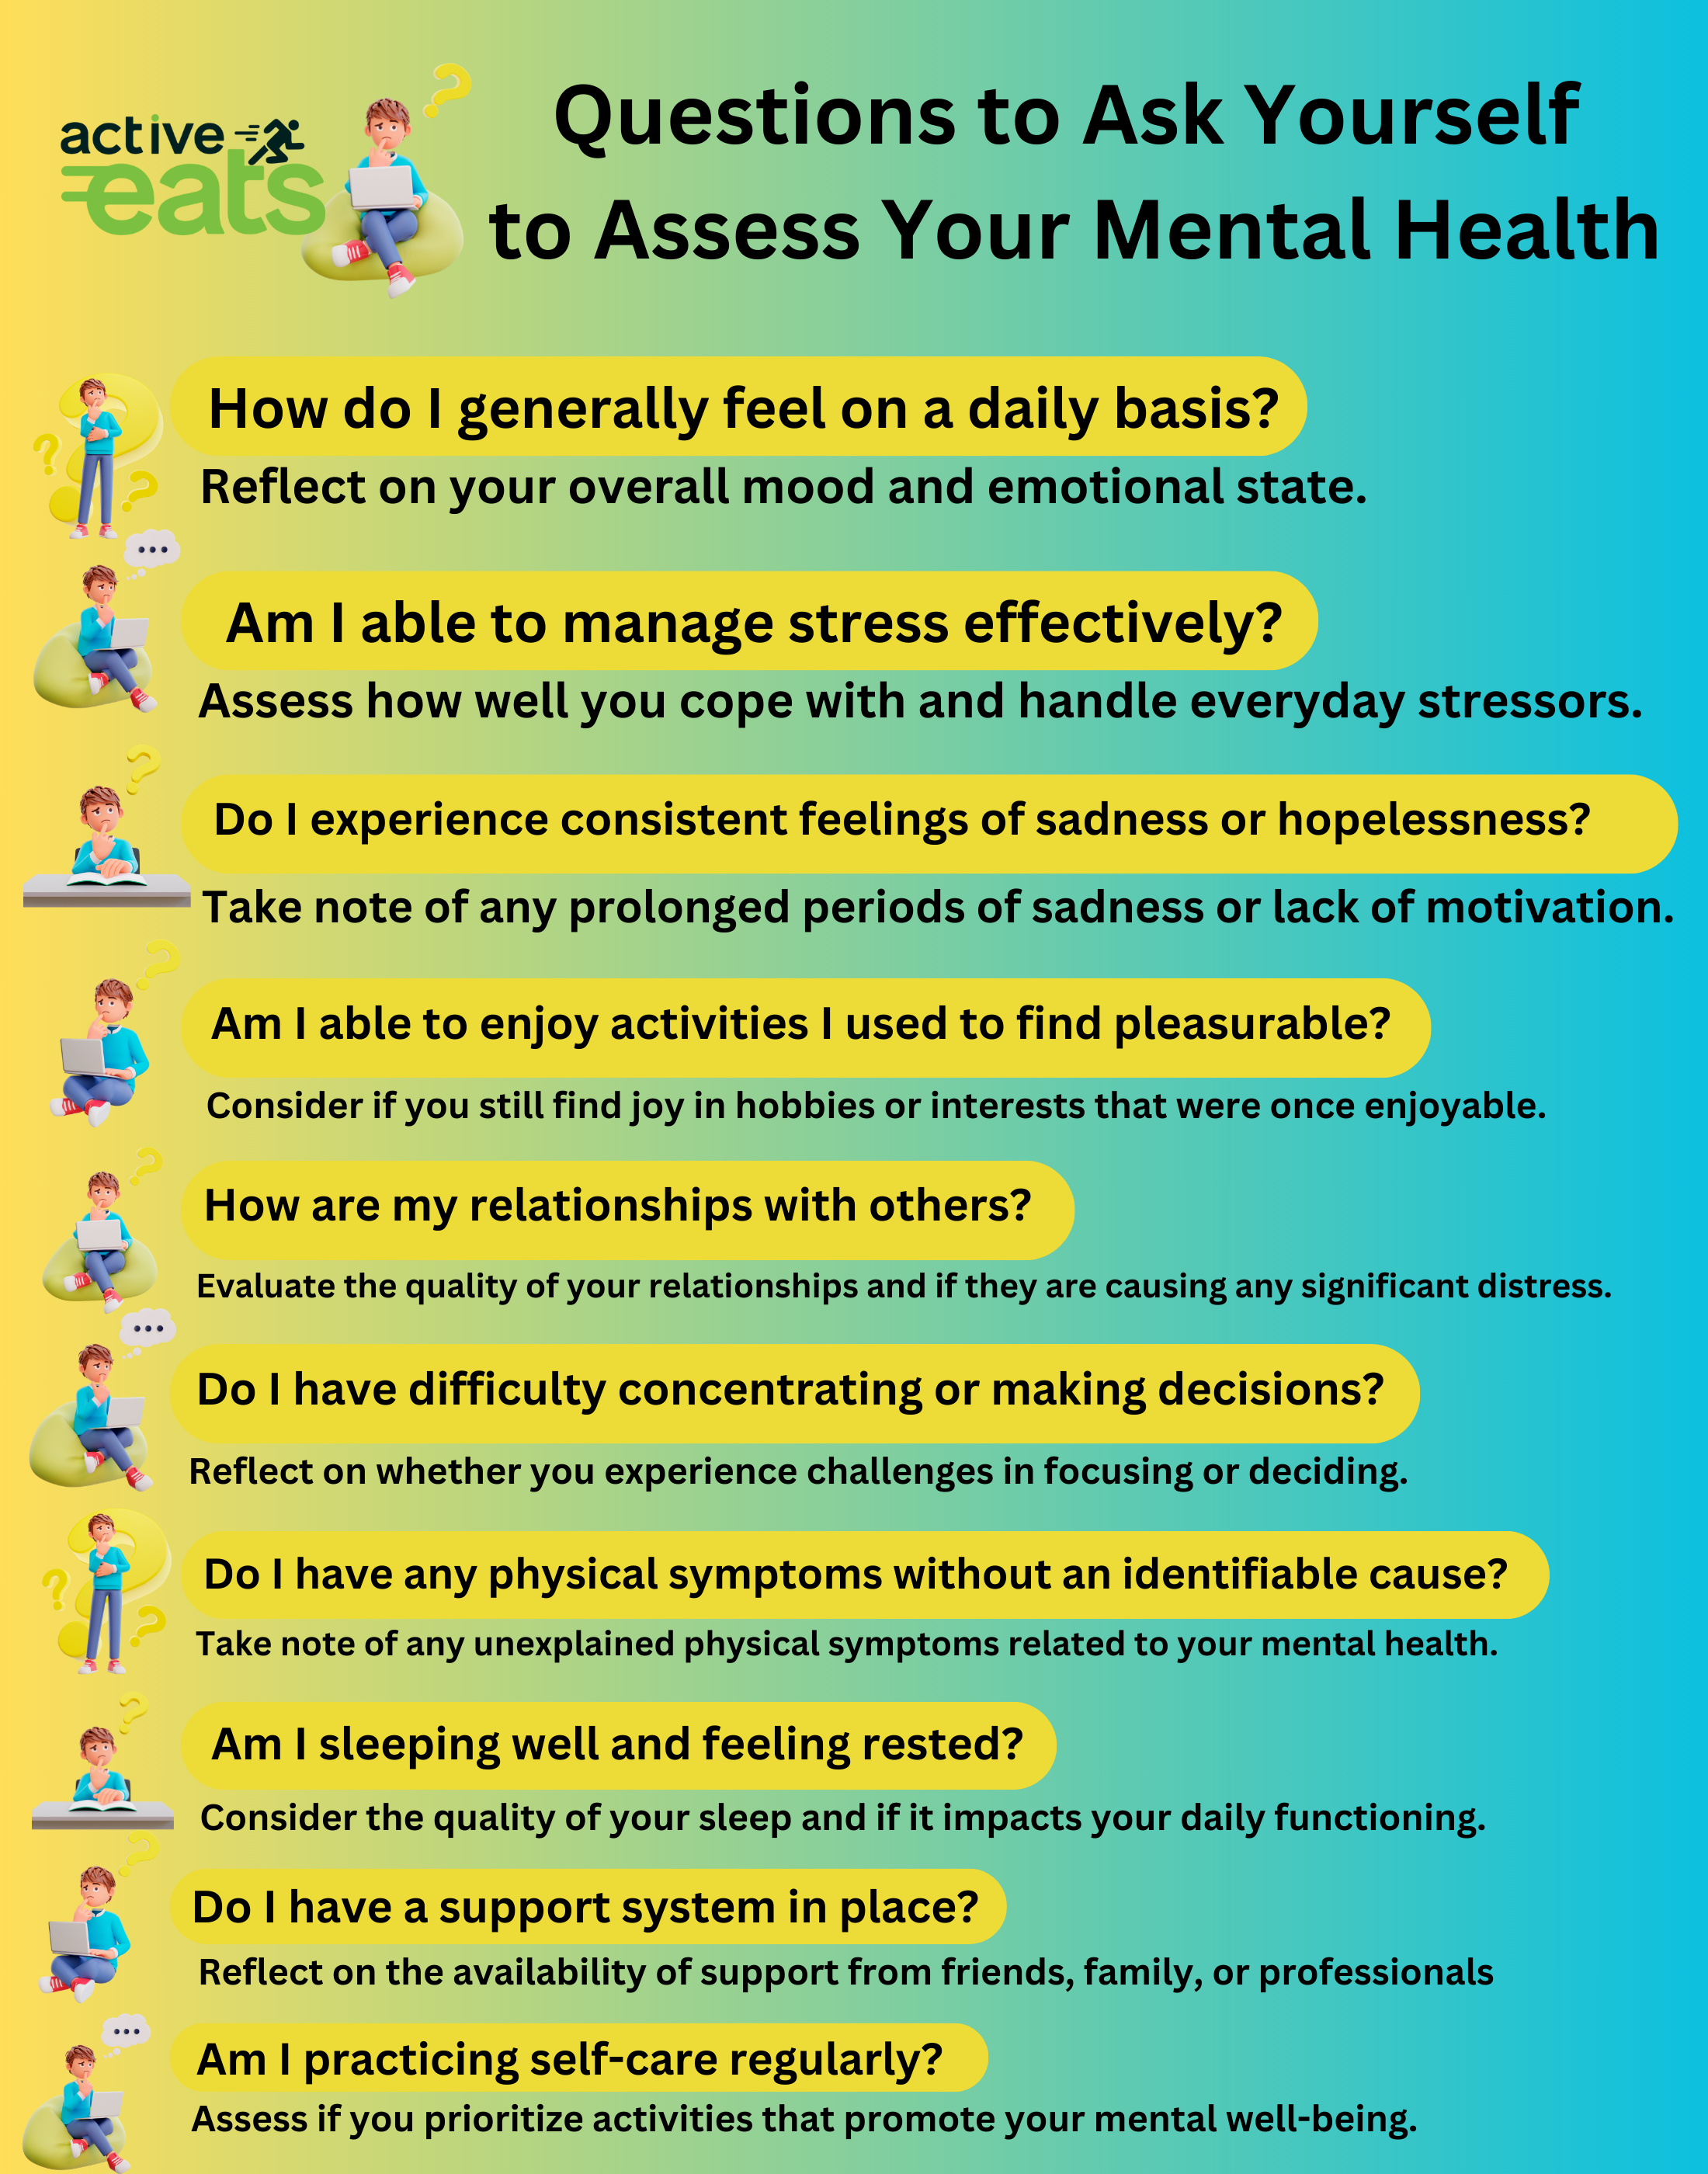 A clean and organized image with text that lists "10 Questions to Ask Yourself to Assess Your Mental Health" in a clear and legible font. Each question is numbered and separated for easy readability.